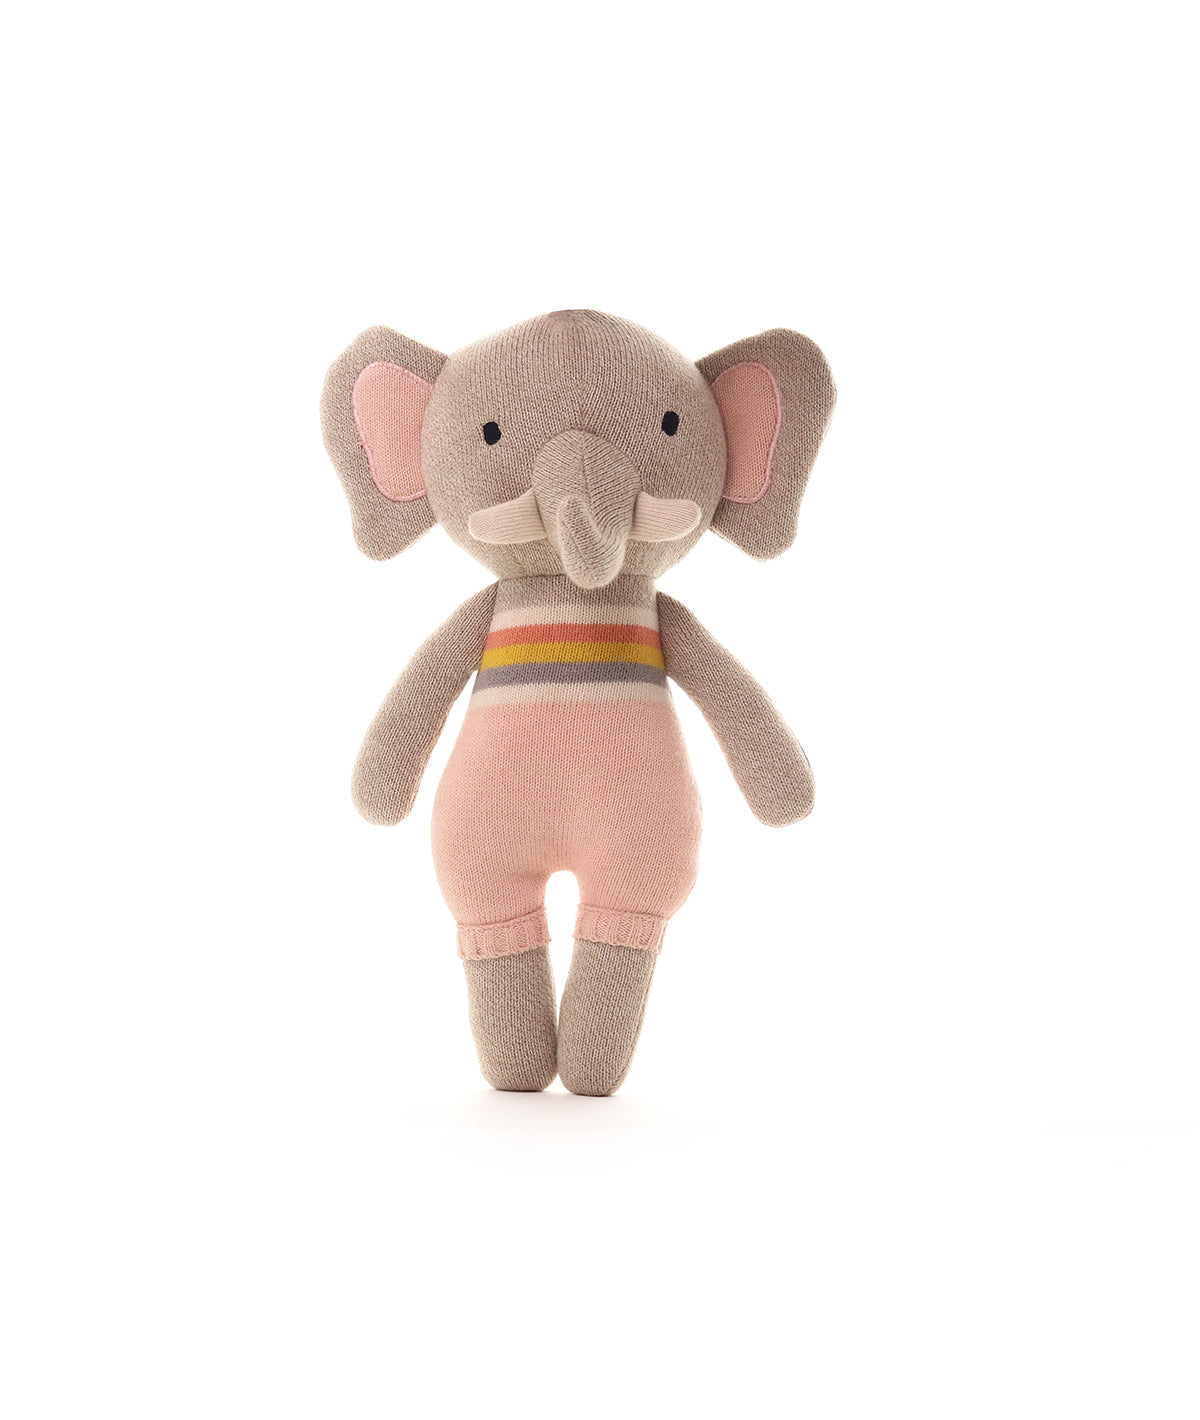 Ellie Elephant- Cotton Knitted Stuffed Soft Toy (Multi Color)